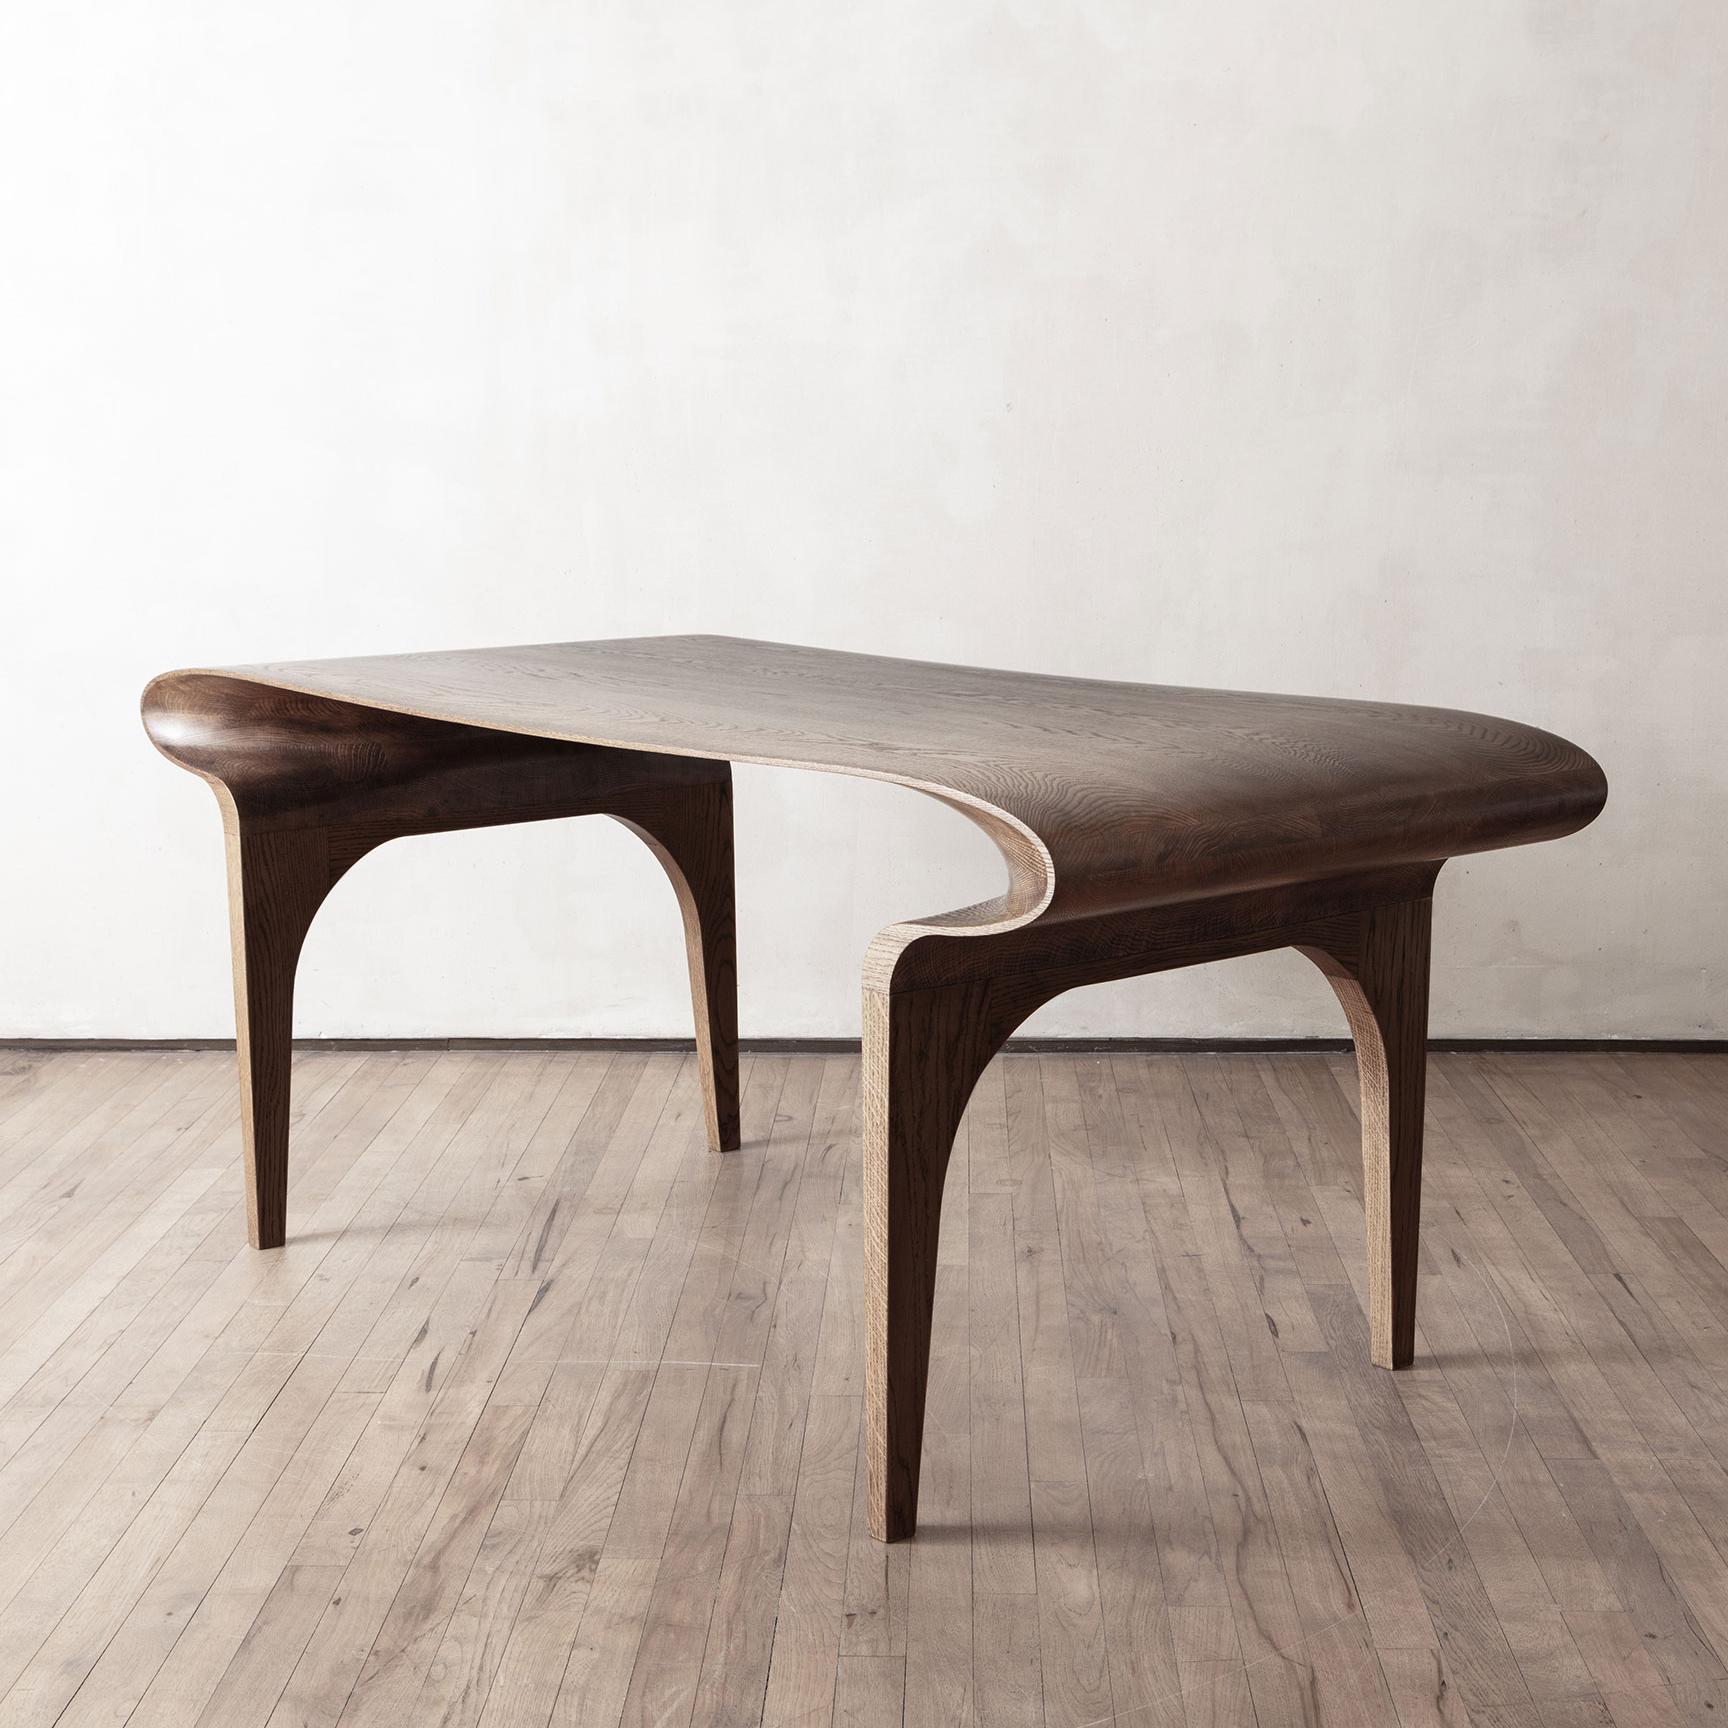 Inspired by the clean, organic silhouettes and elegant simplicity of the 20th Century Art Nouveau, Sperlein first introduced the Contour Collection in 2009. The fluid curves of the wood piece result from the time-honored woodcraft techniques and